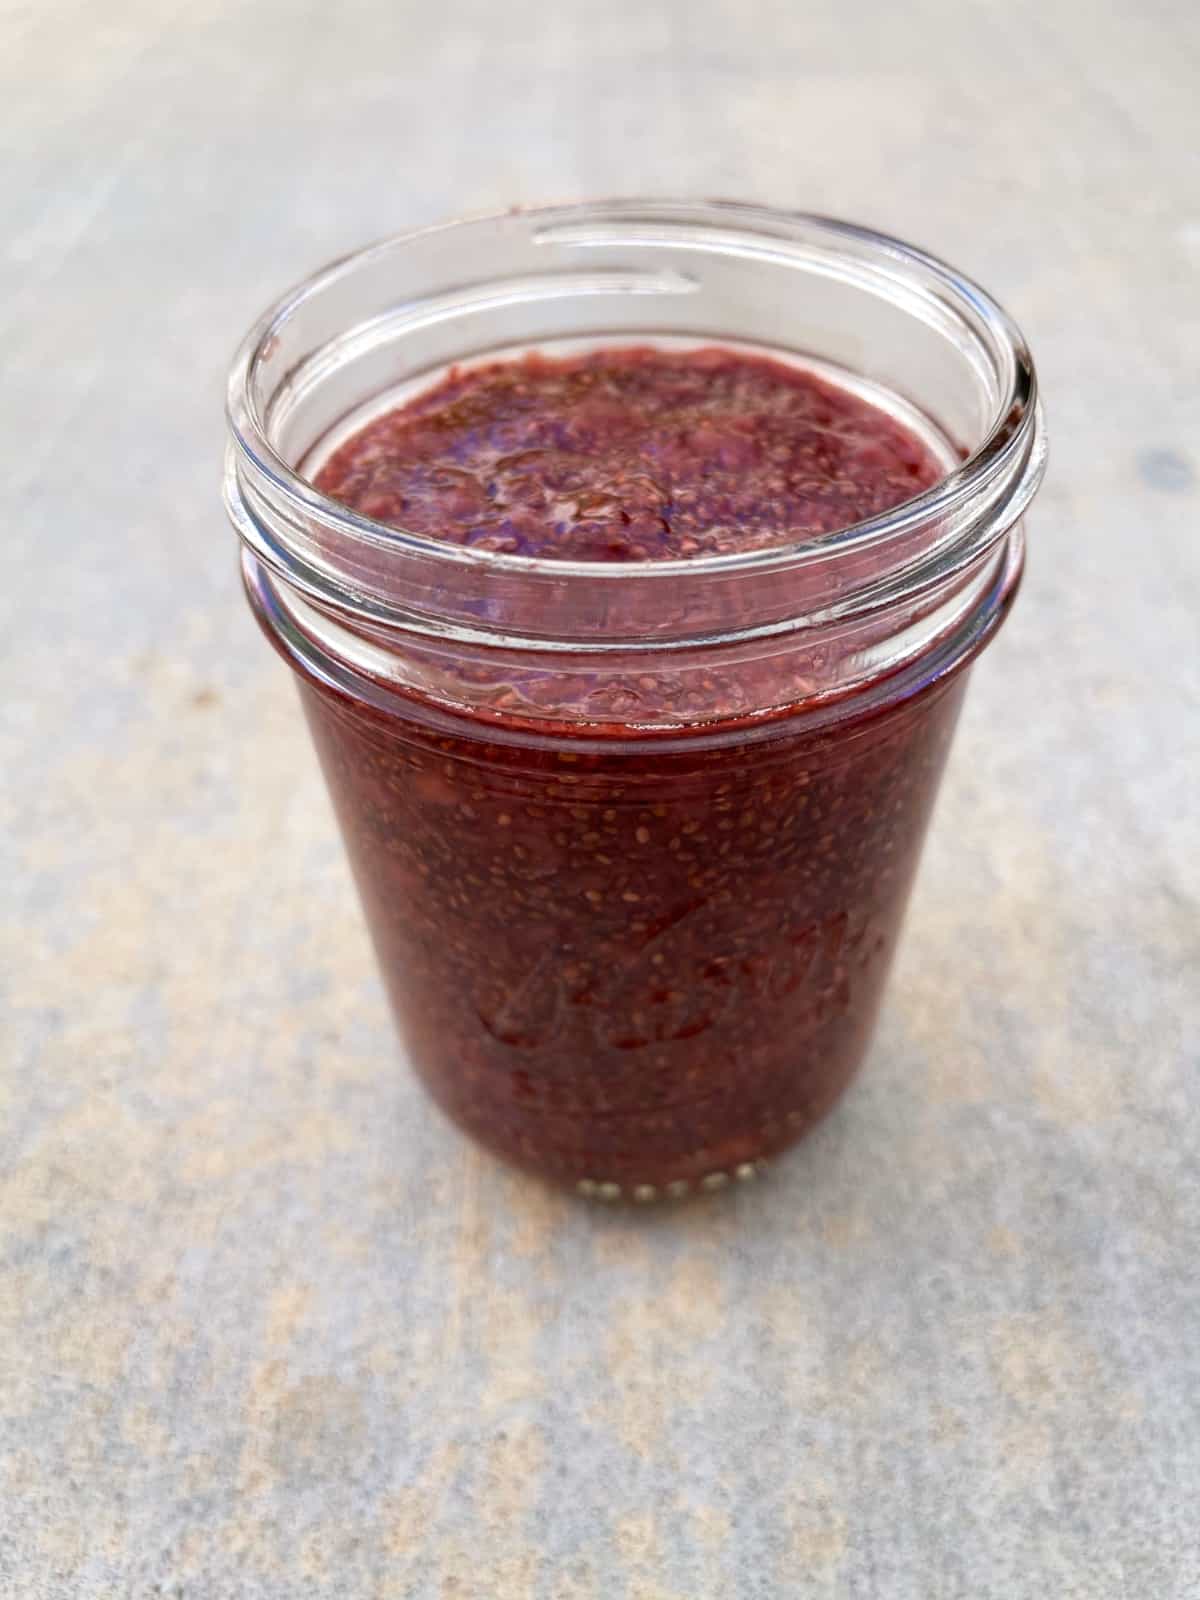 Strawberry chia seed jam in glass jar without lid.